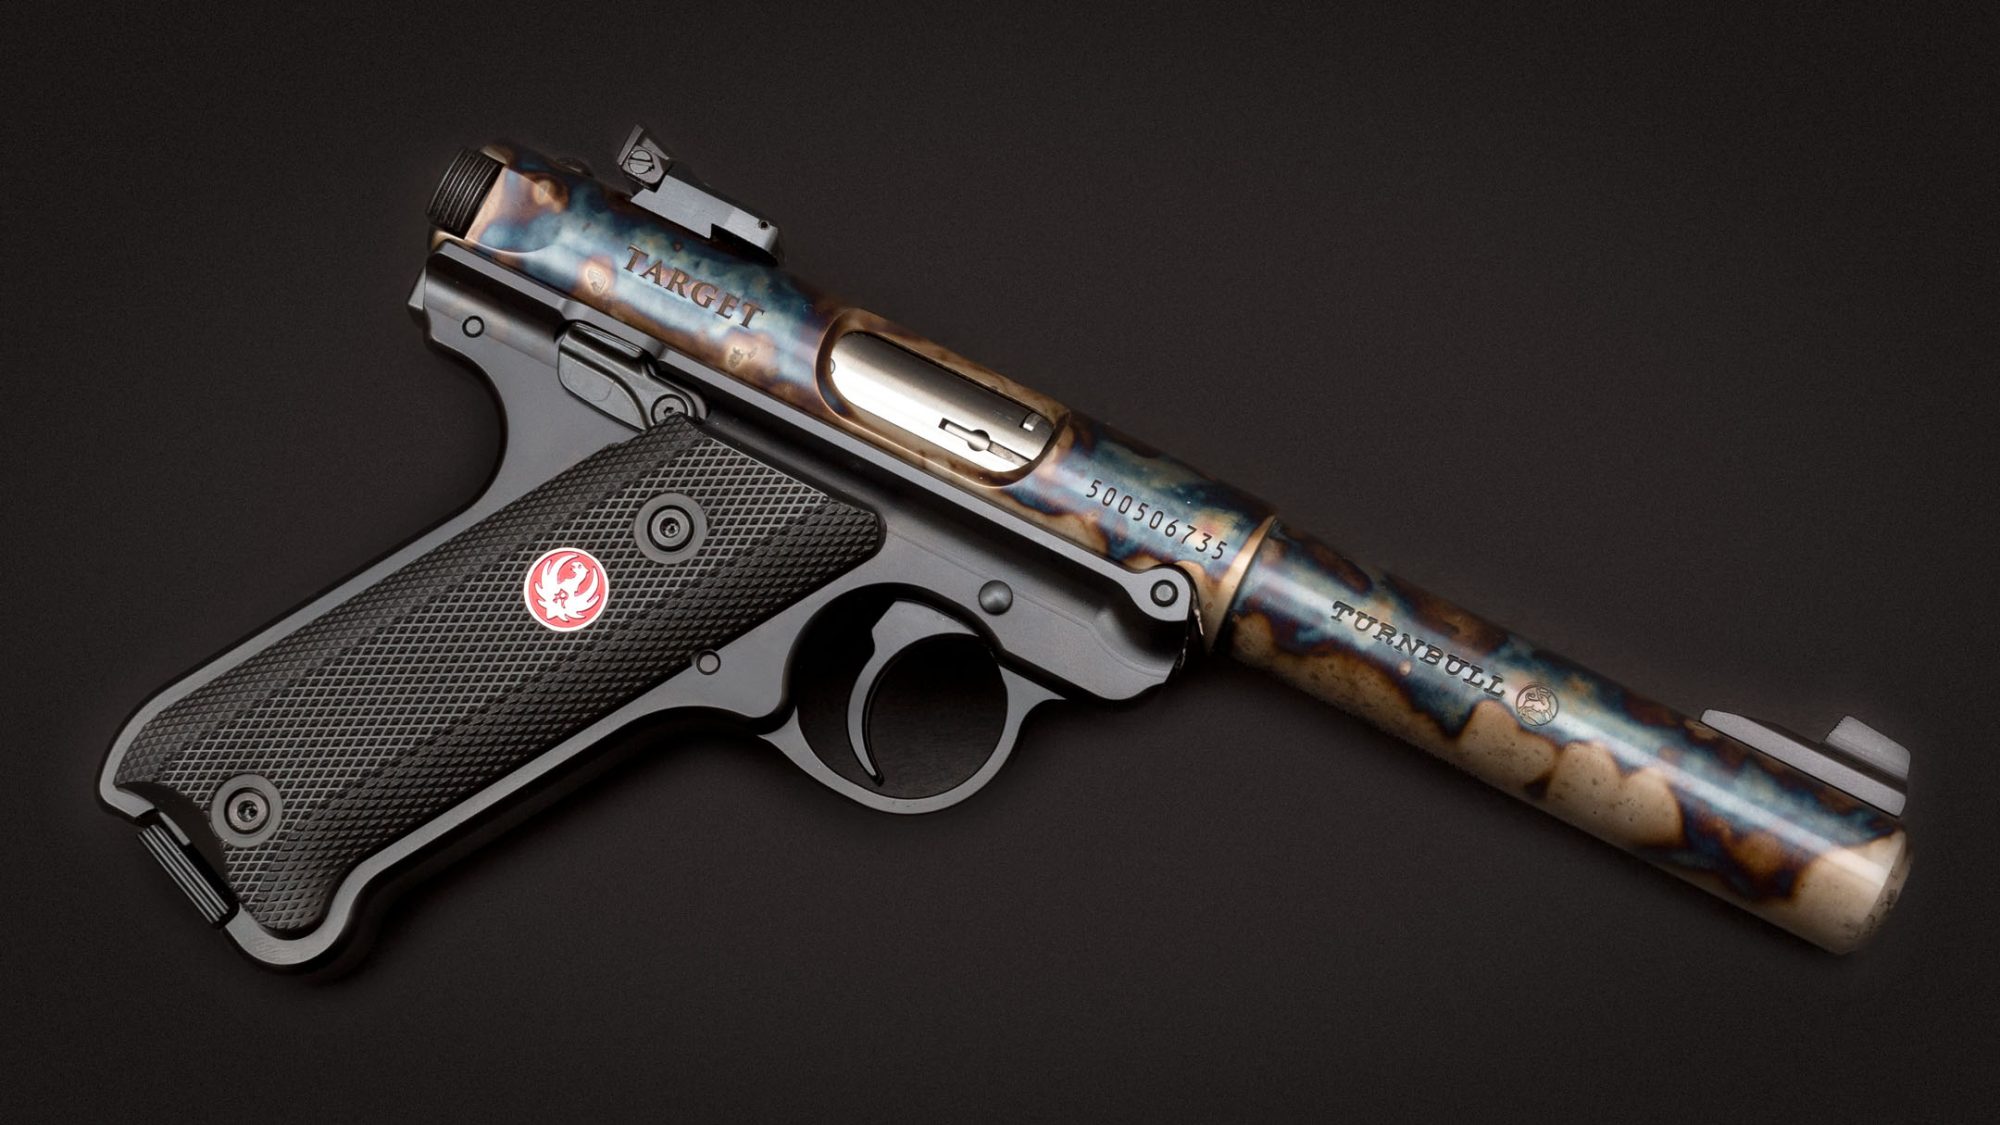 Photo of a color case hardened Ruger Mark IV Target pistol, featuring bone charcoal color case hardening by Turnbull Restoration of Bloomfield, NY